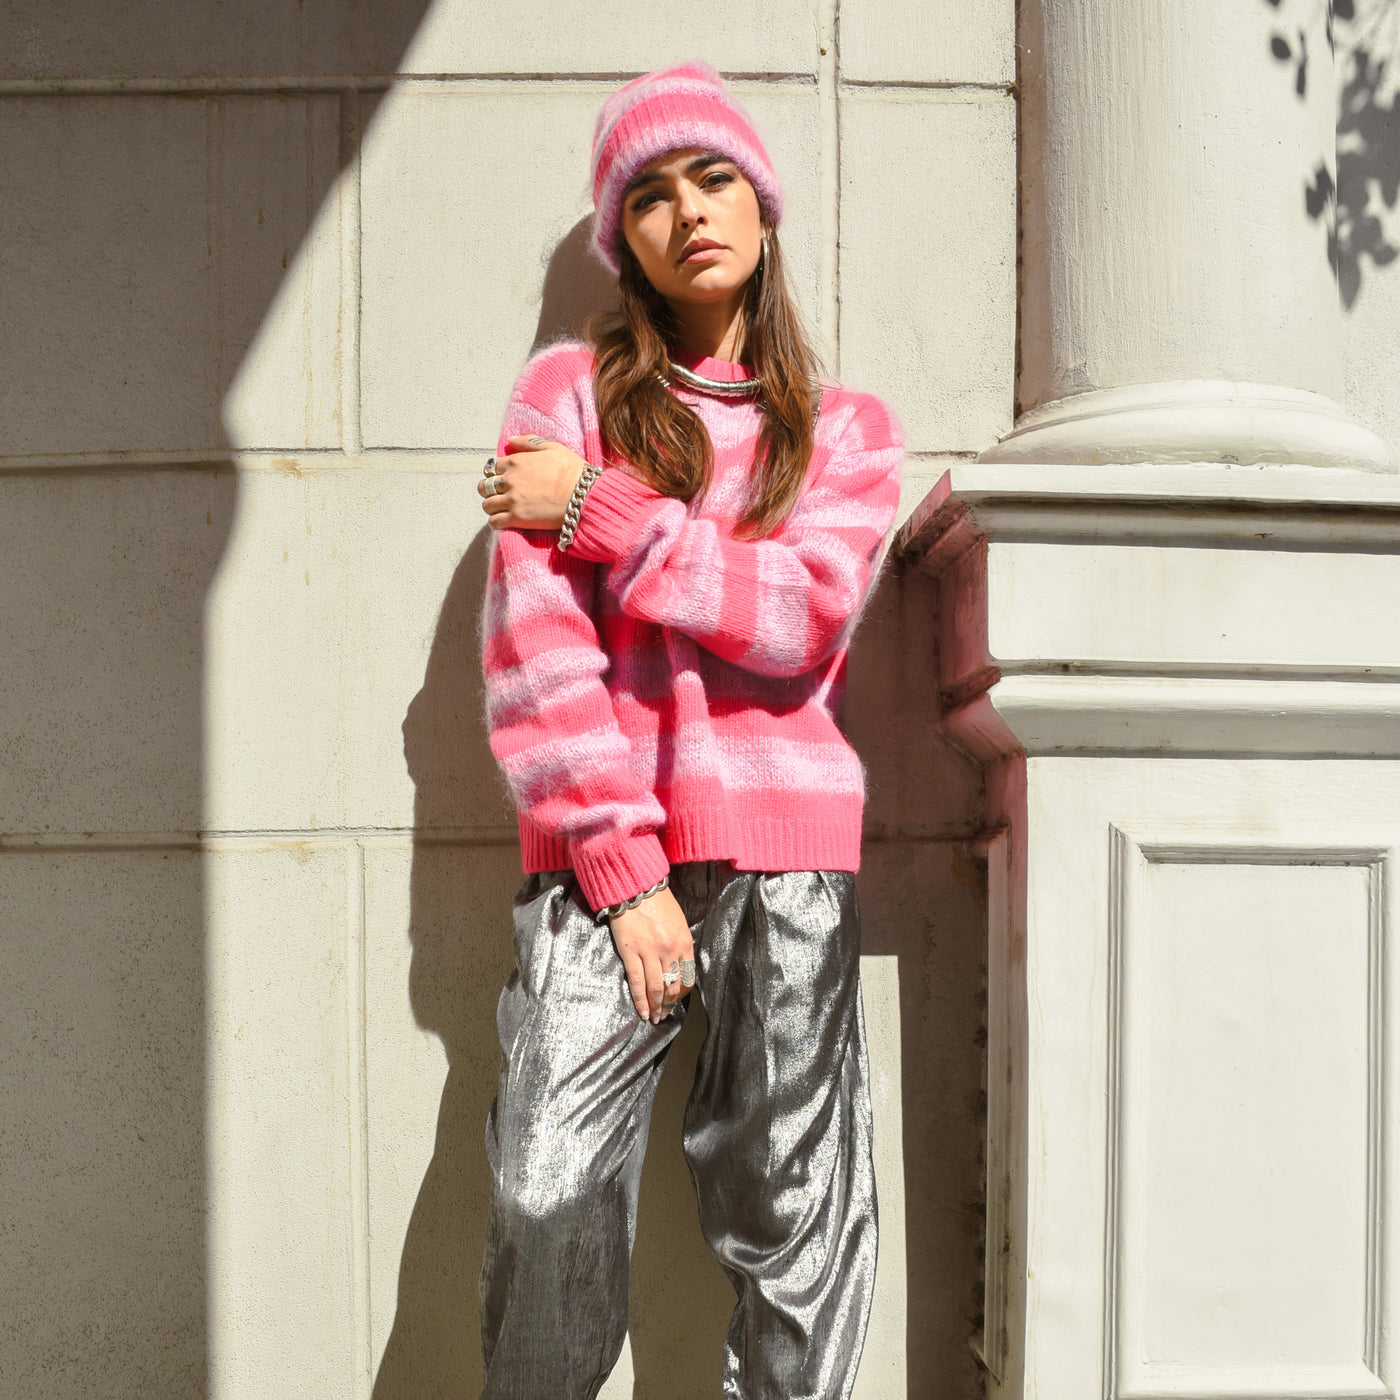 Model is posed in the pink Wool Mix Sweater, Wool Mix Hat, and Silver Shiny Pants all from Stella Nova. Model wears jewelry from Saint Claude.